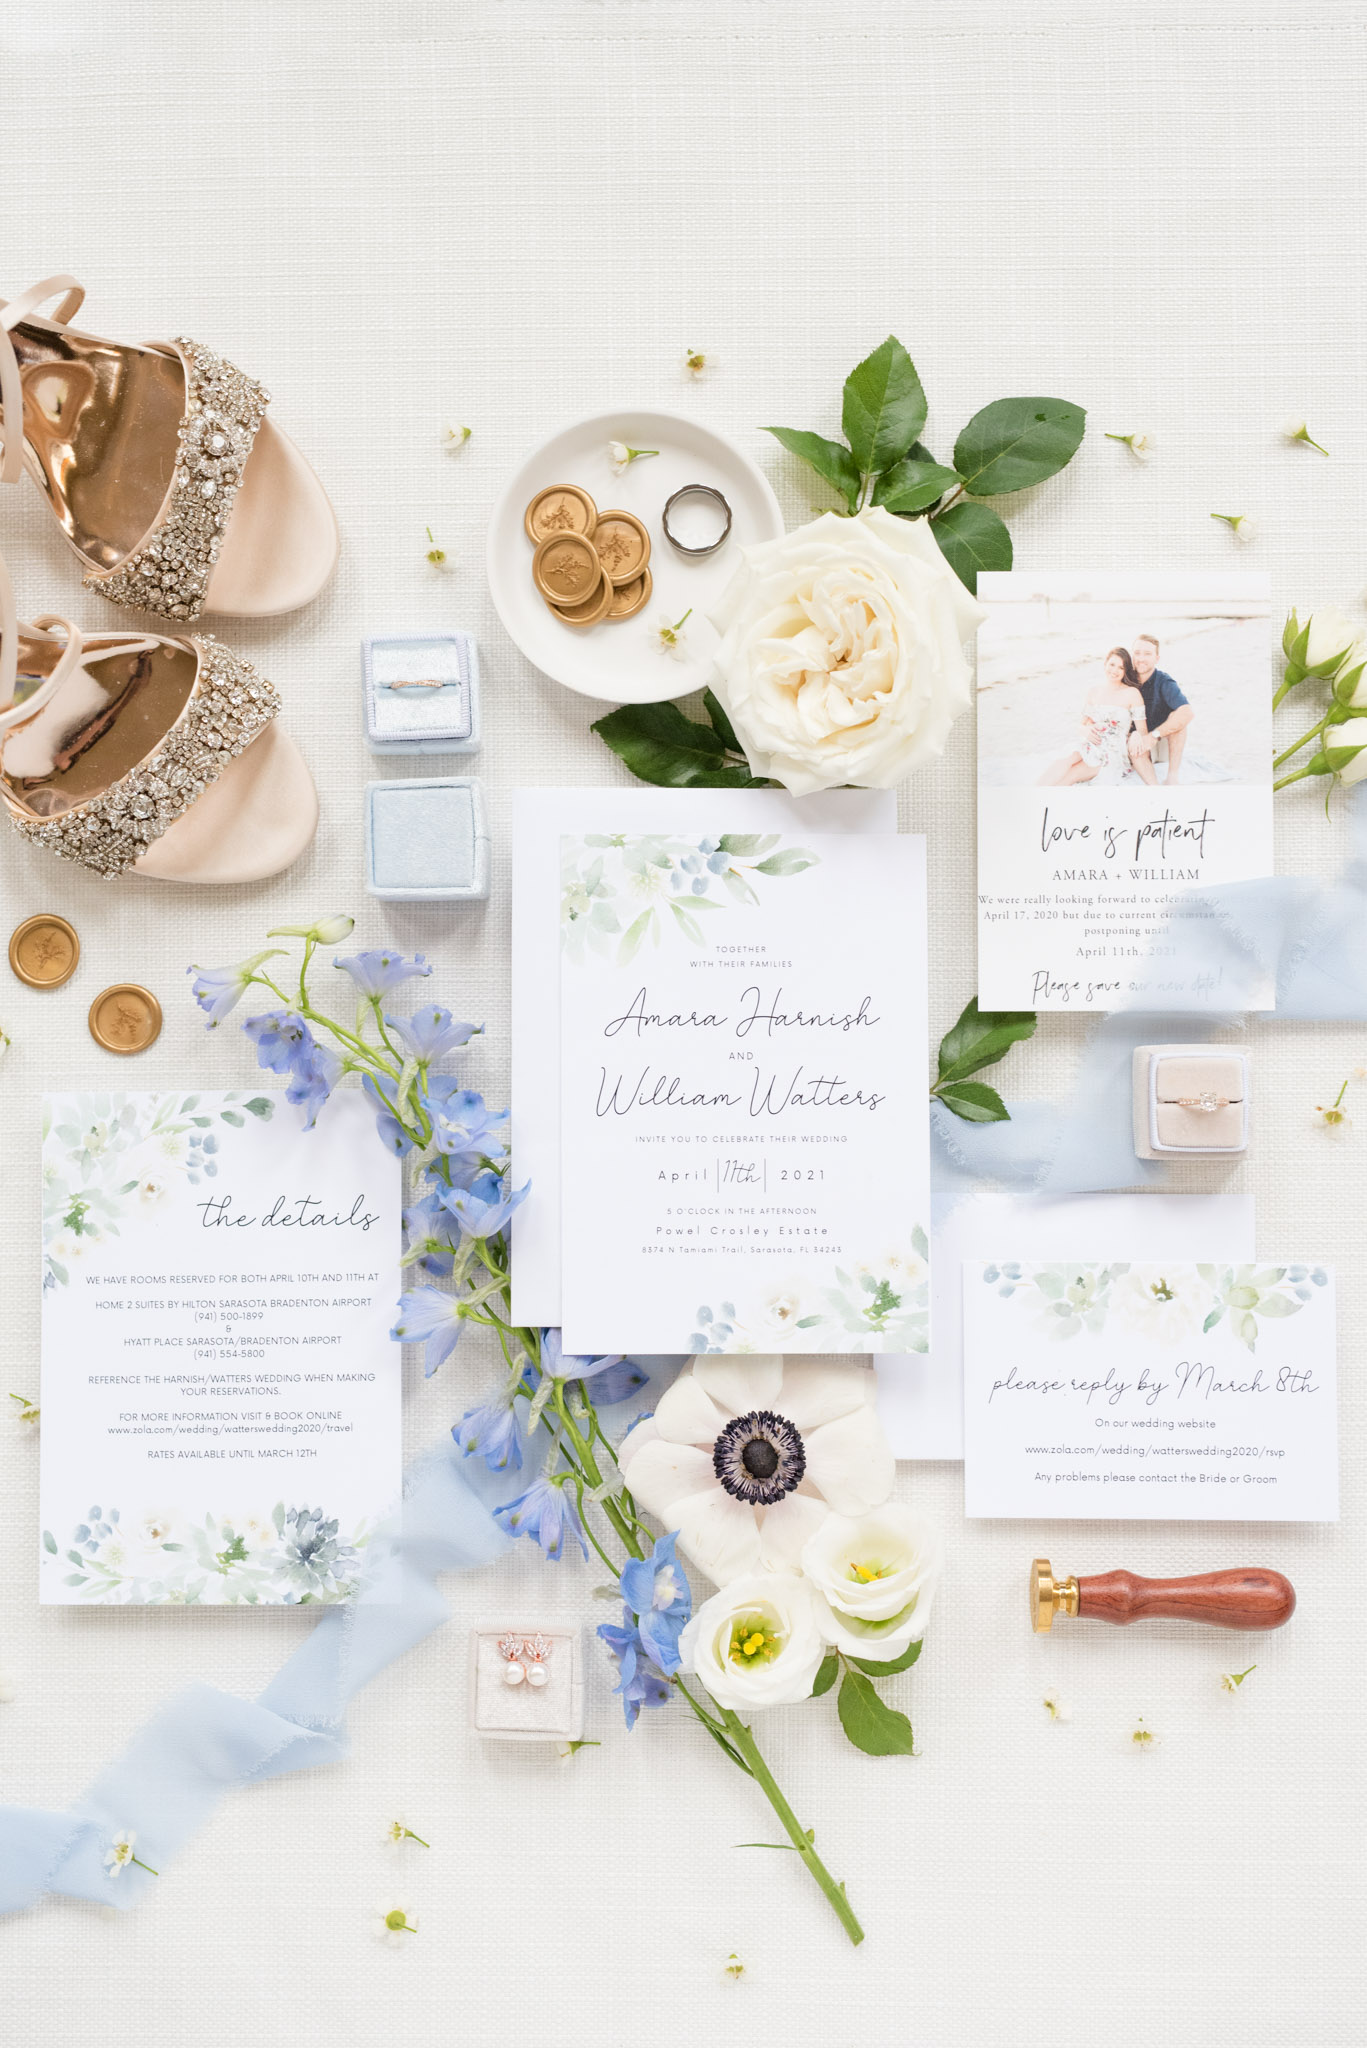 Wedding invitations with bride's details.